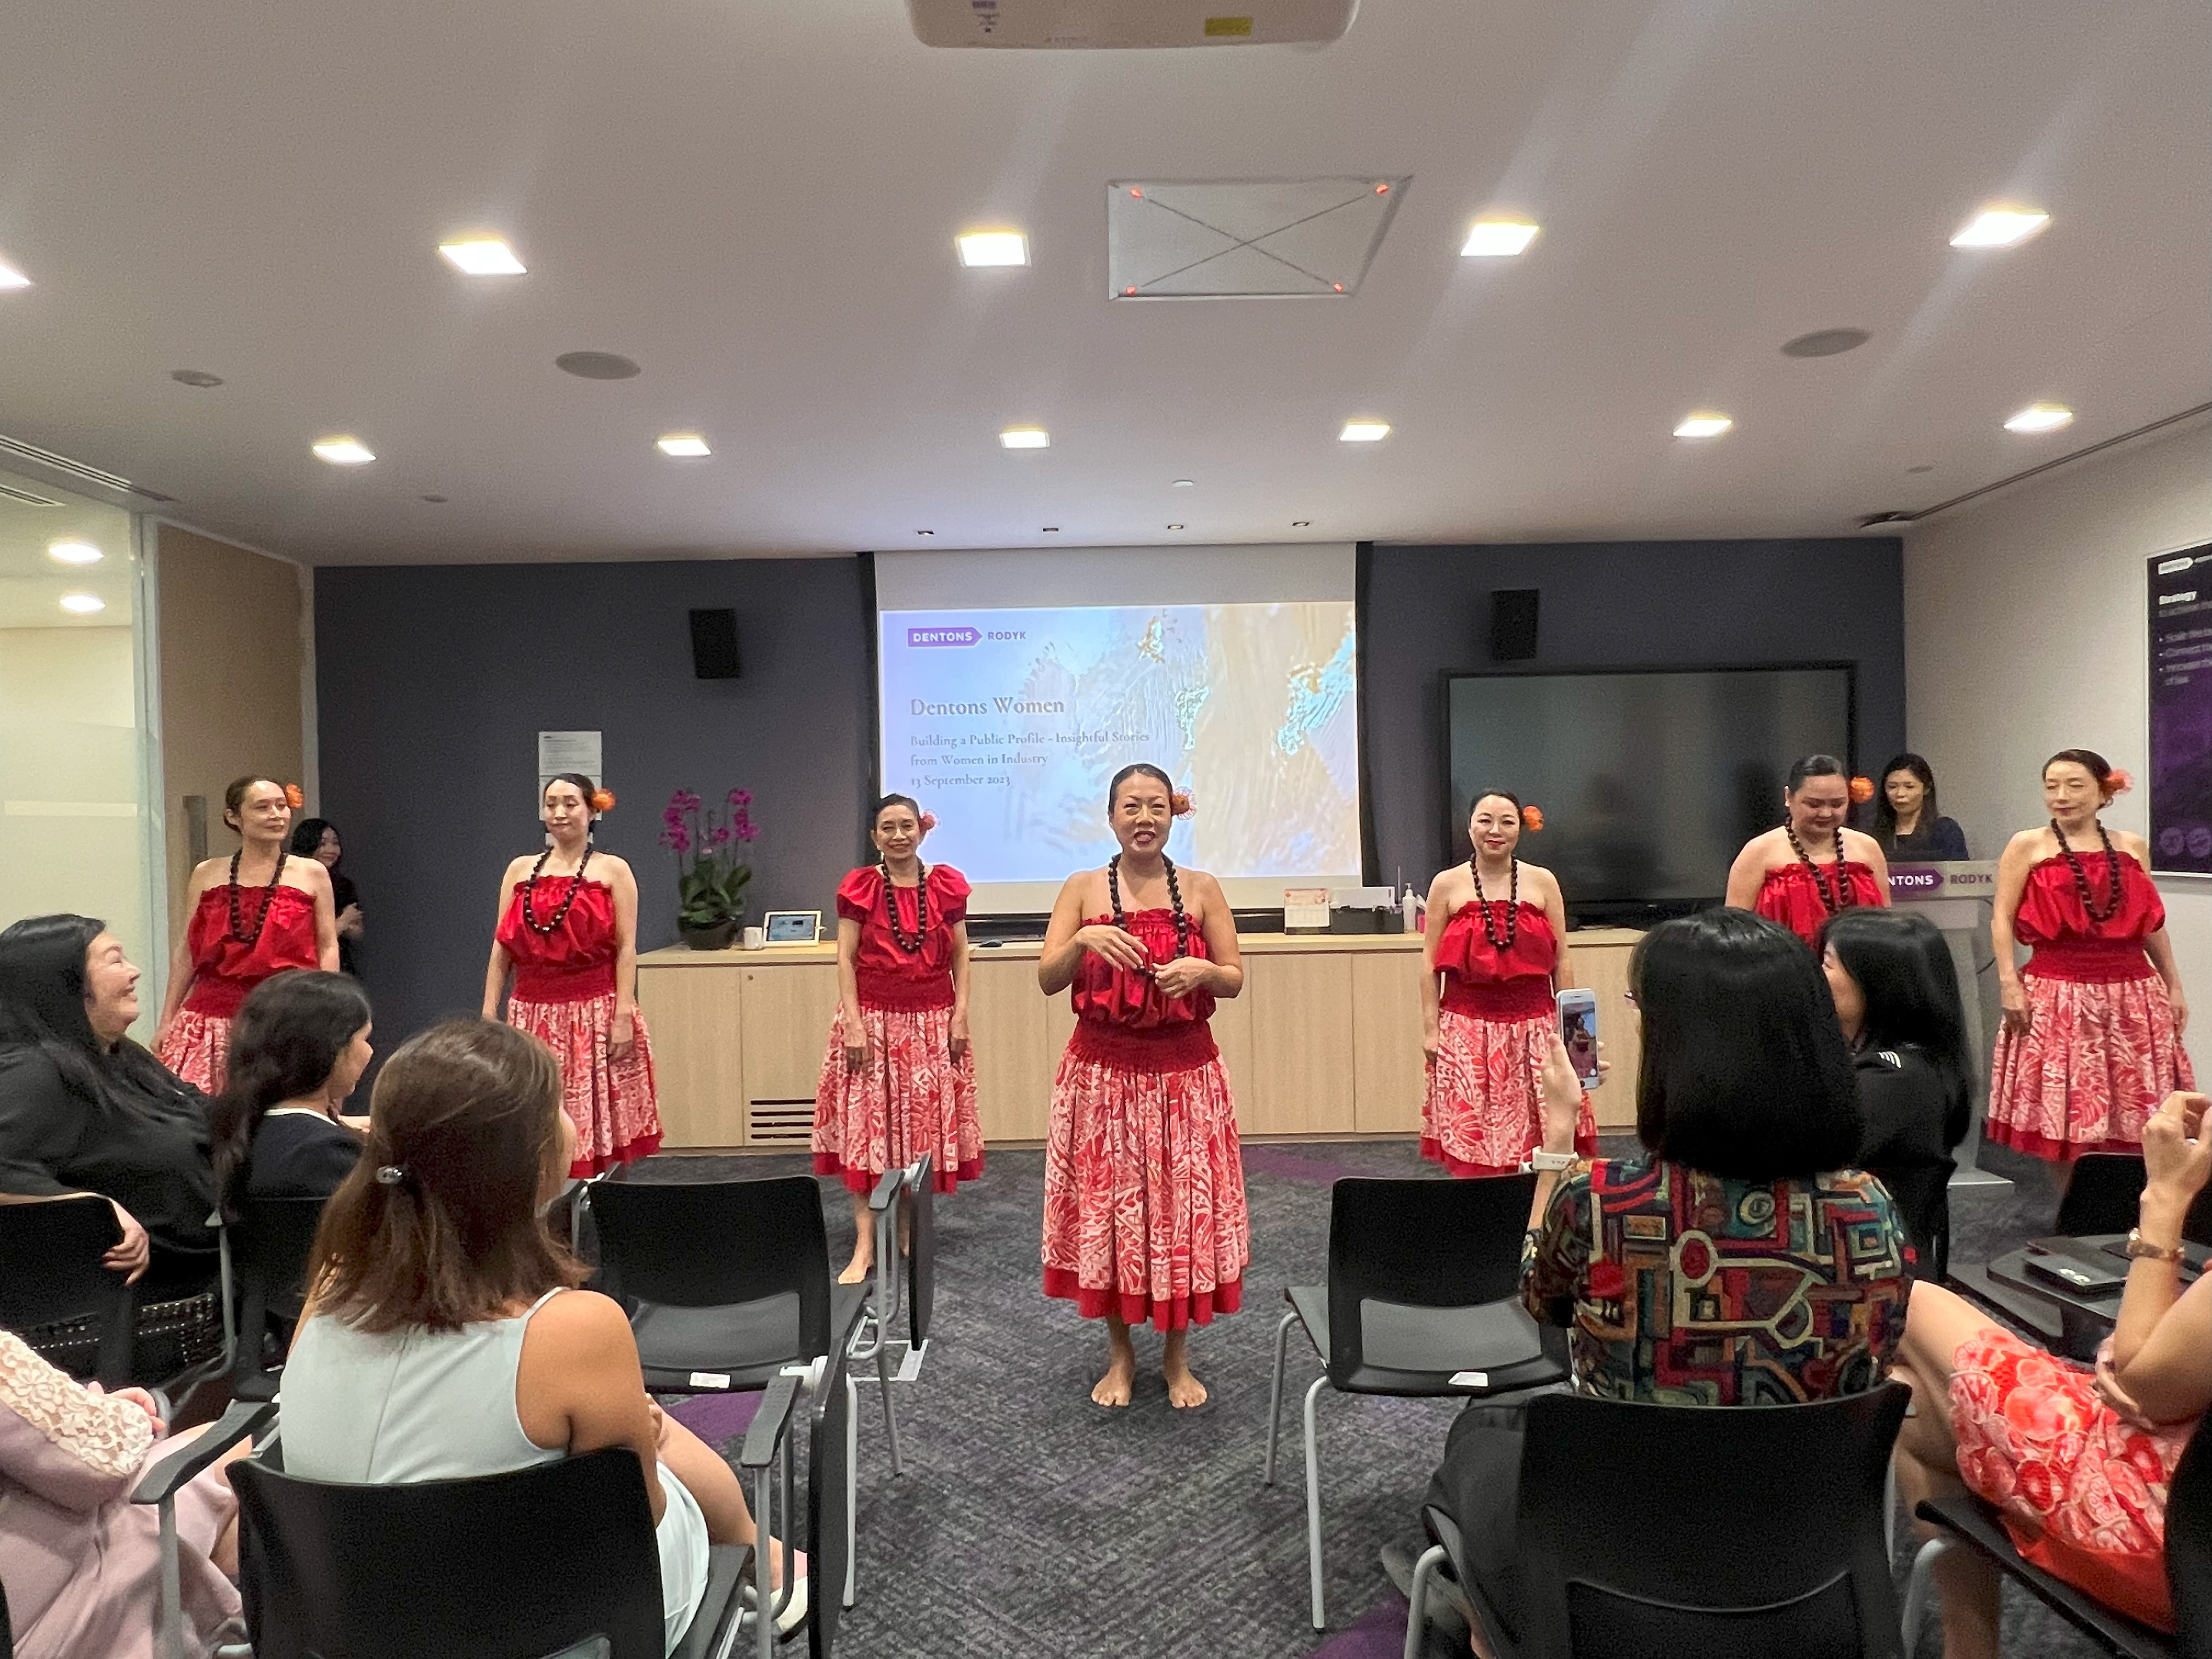 Hula dancers swaying to the groove of Hawaiian music at one of our Dentons Women gathering sessions